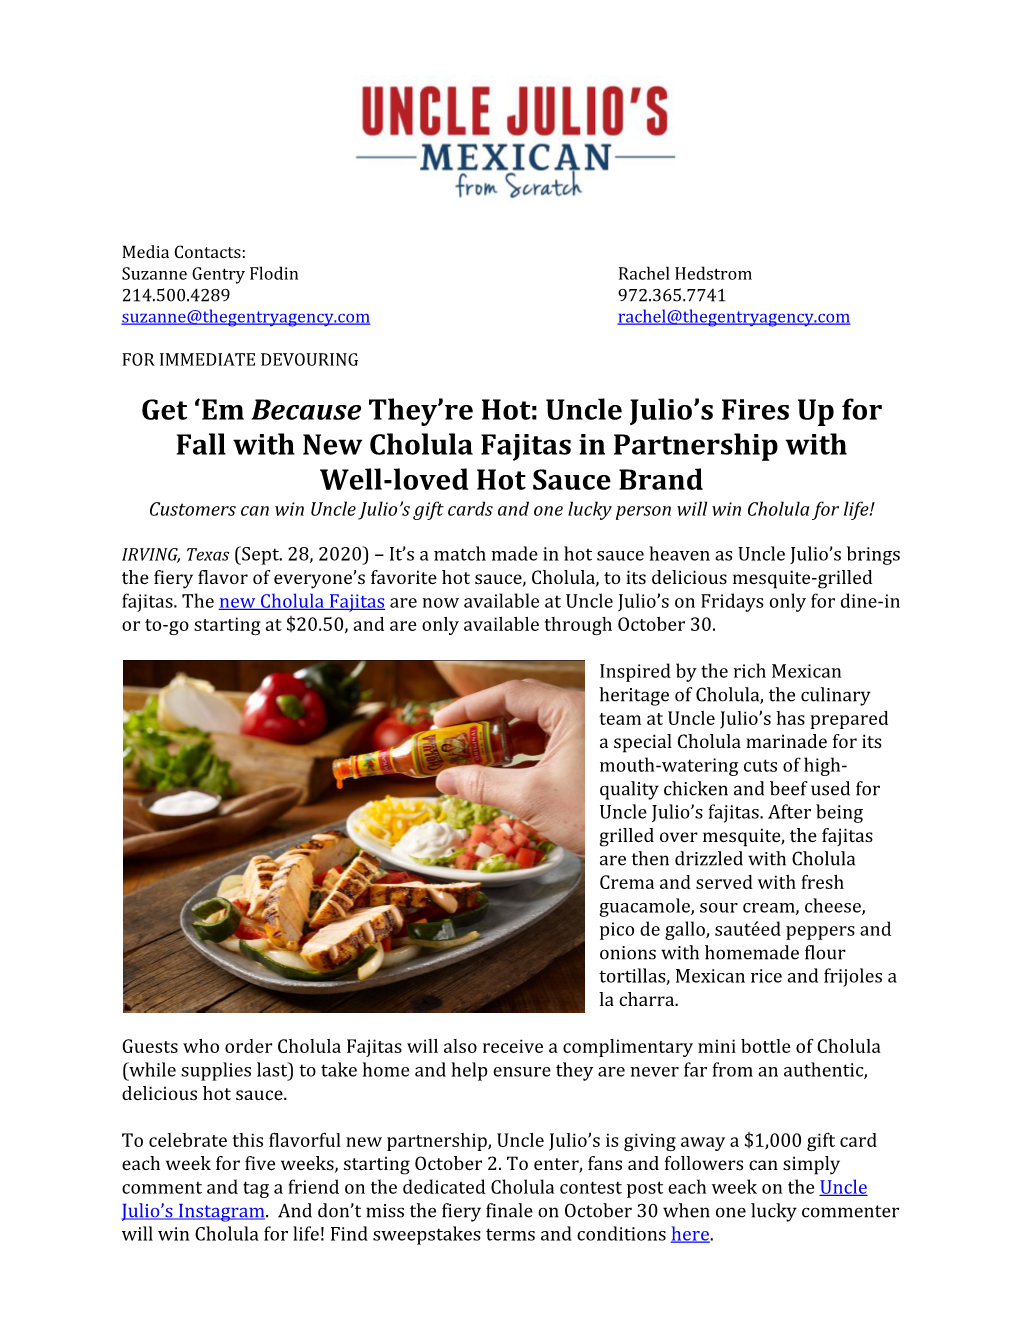 Get 'Em Because They're Hot: Uncle Julio's Fires up for Fall with New Cholula Fajitas in Partnership with Well-Loved Ho